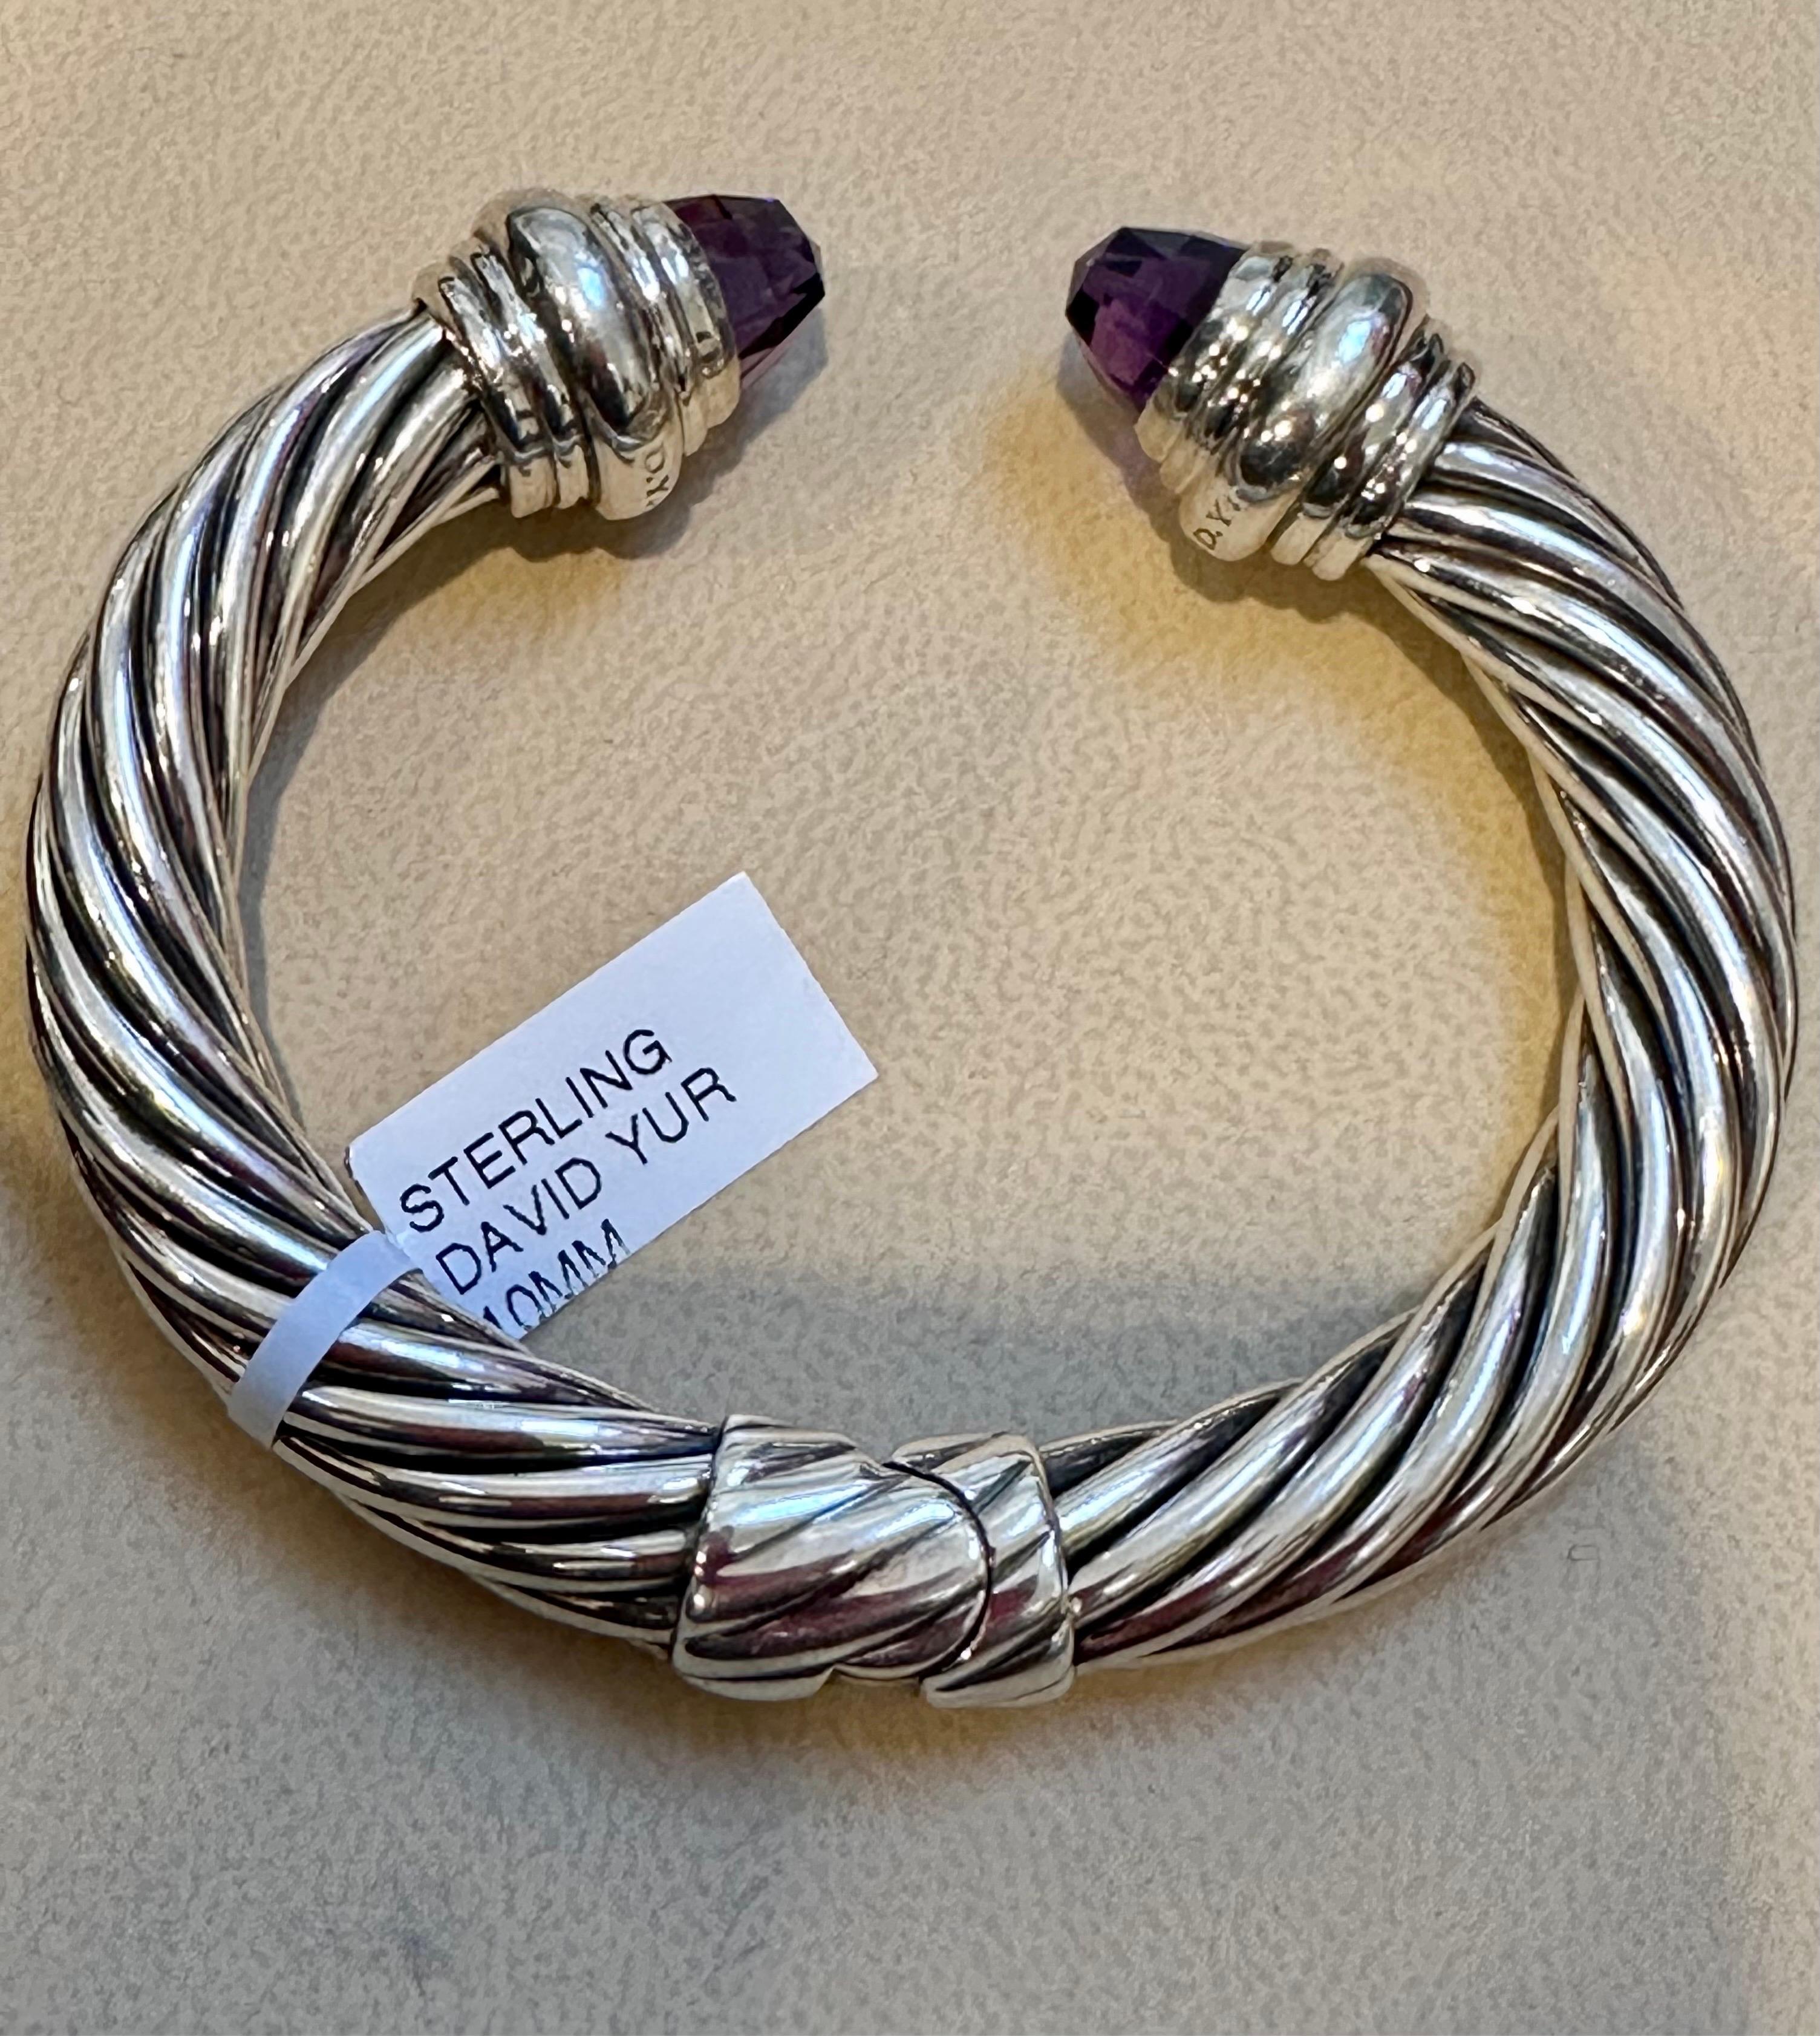 This pre-owned bangle is a beautiful piece of jewelry that showcases David Yurman's artistic signature style. Yurman's Cable design began as a bracelet that he hand-twisted from 50 feet of wire. Over the past 30 years, he has evolved the twisted